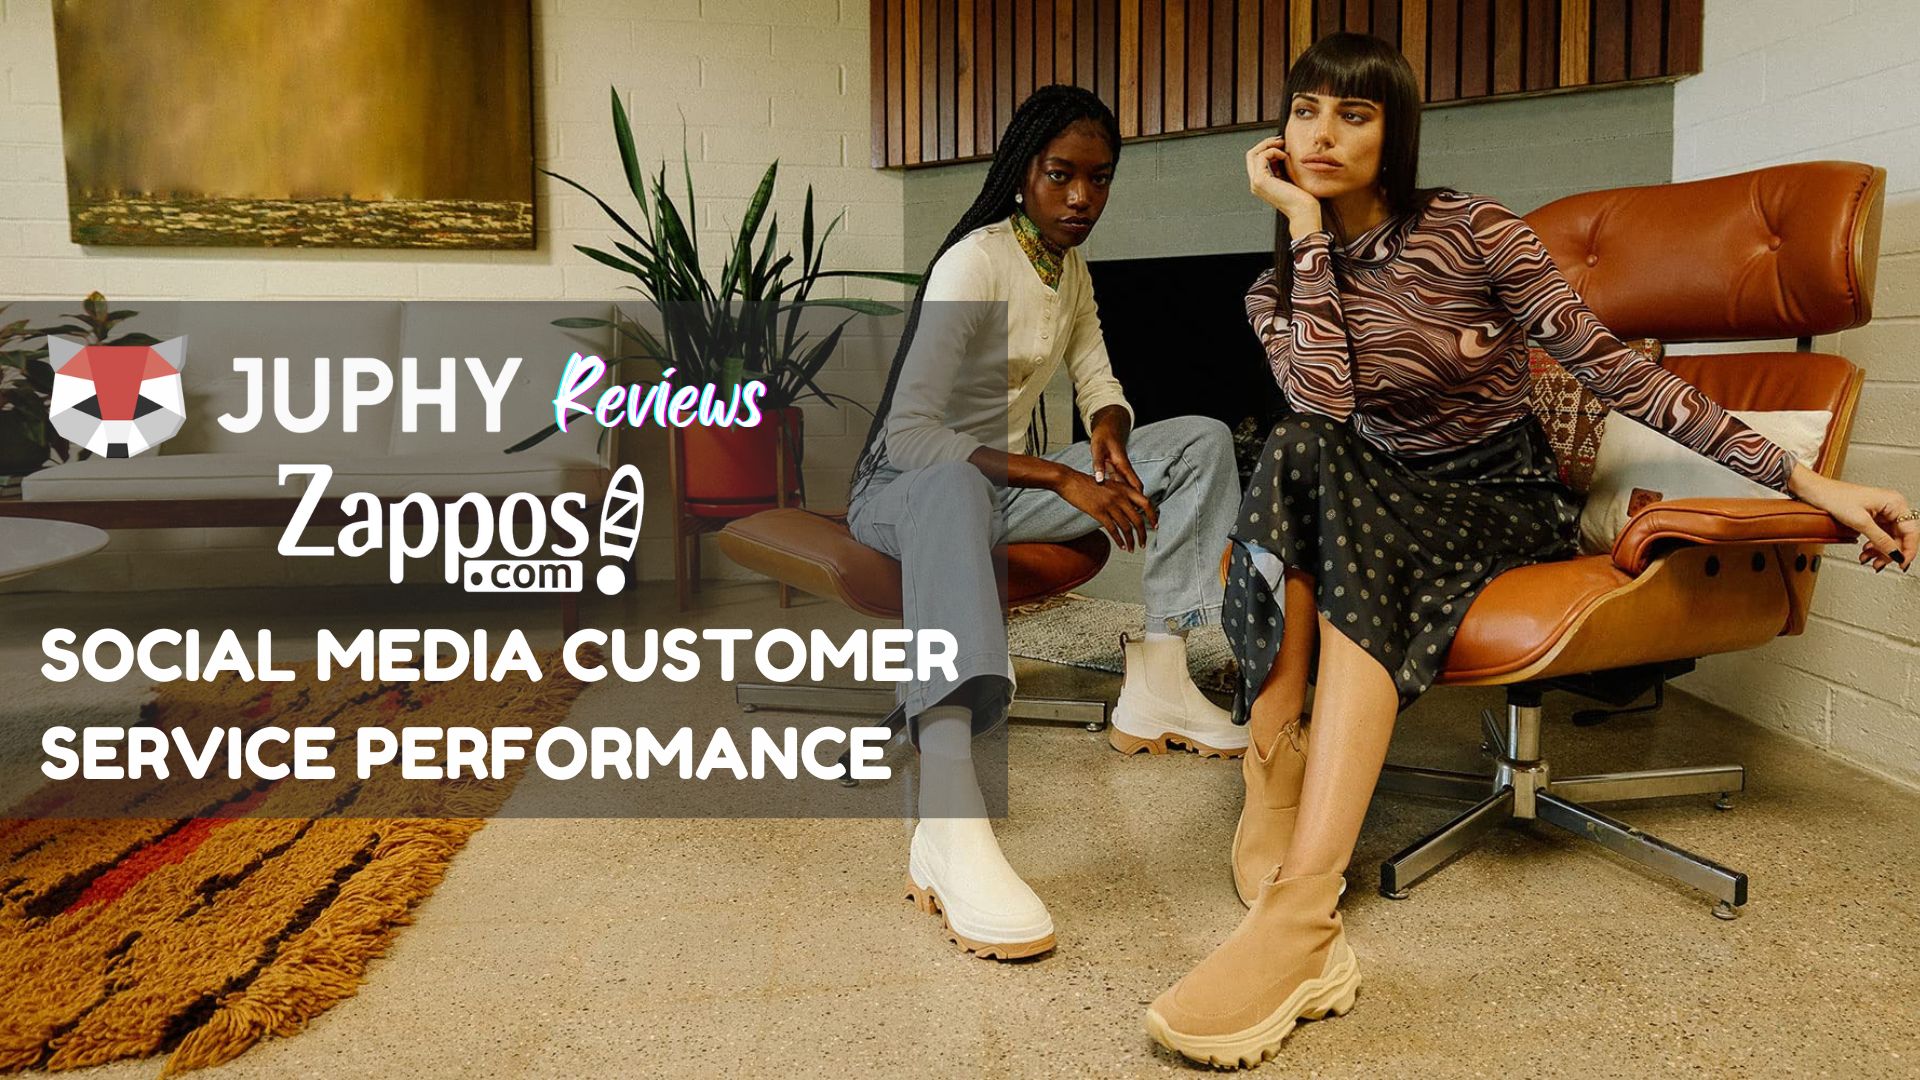 The importance of friendly customer service: 6 tips from Zappos